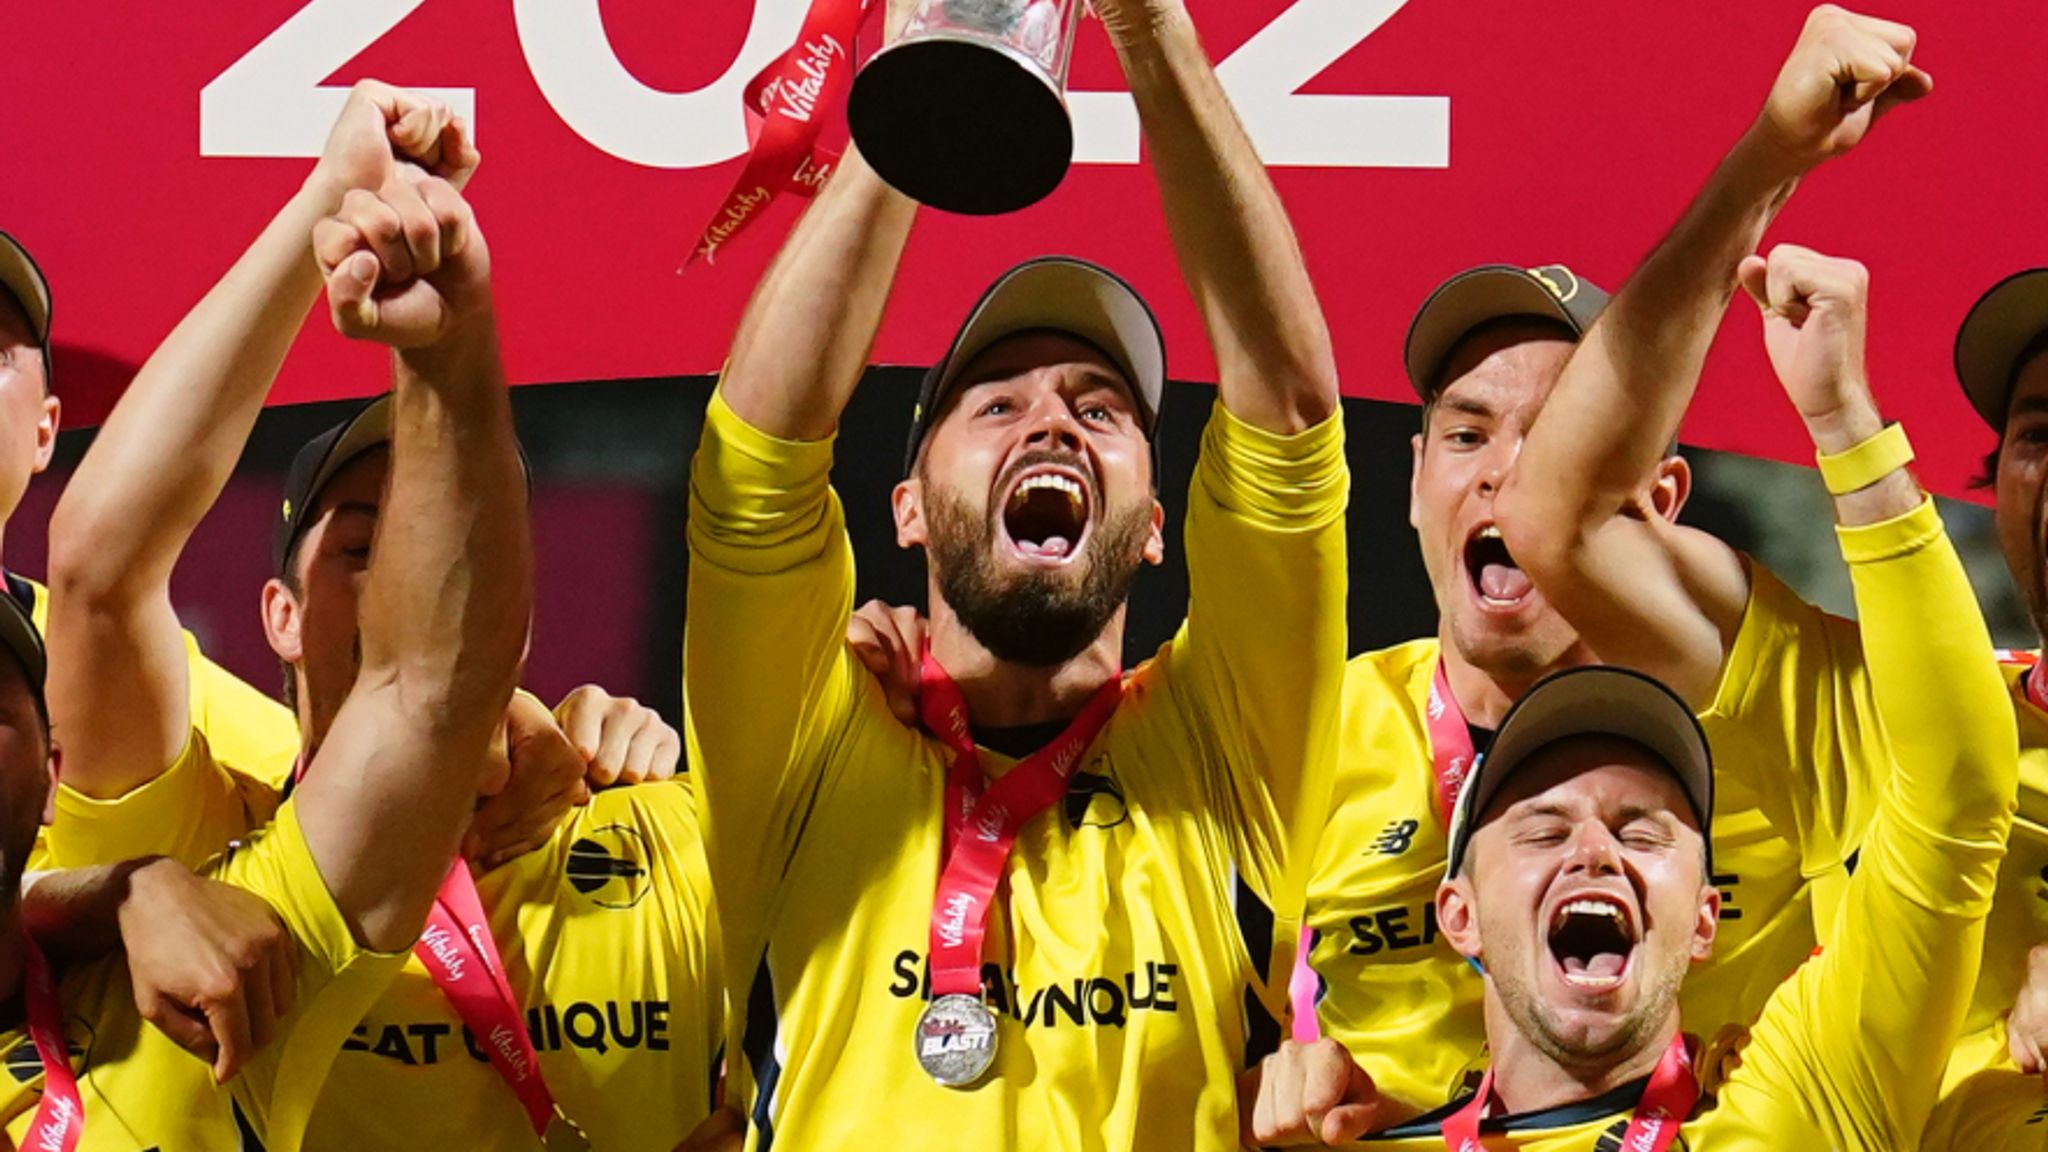 2023 Vitality Blast Your essential guide to the T20 tournament, live on Sky Sports Cricket News Sky Sports